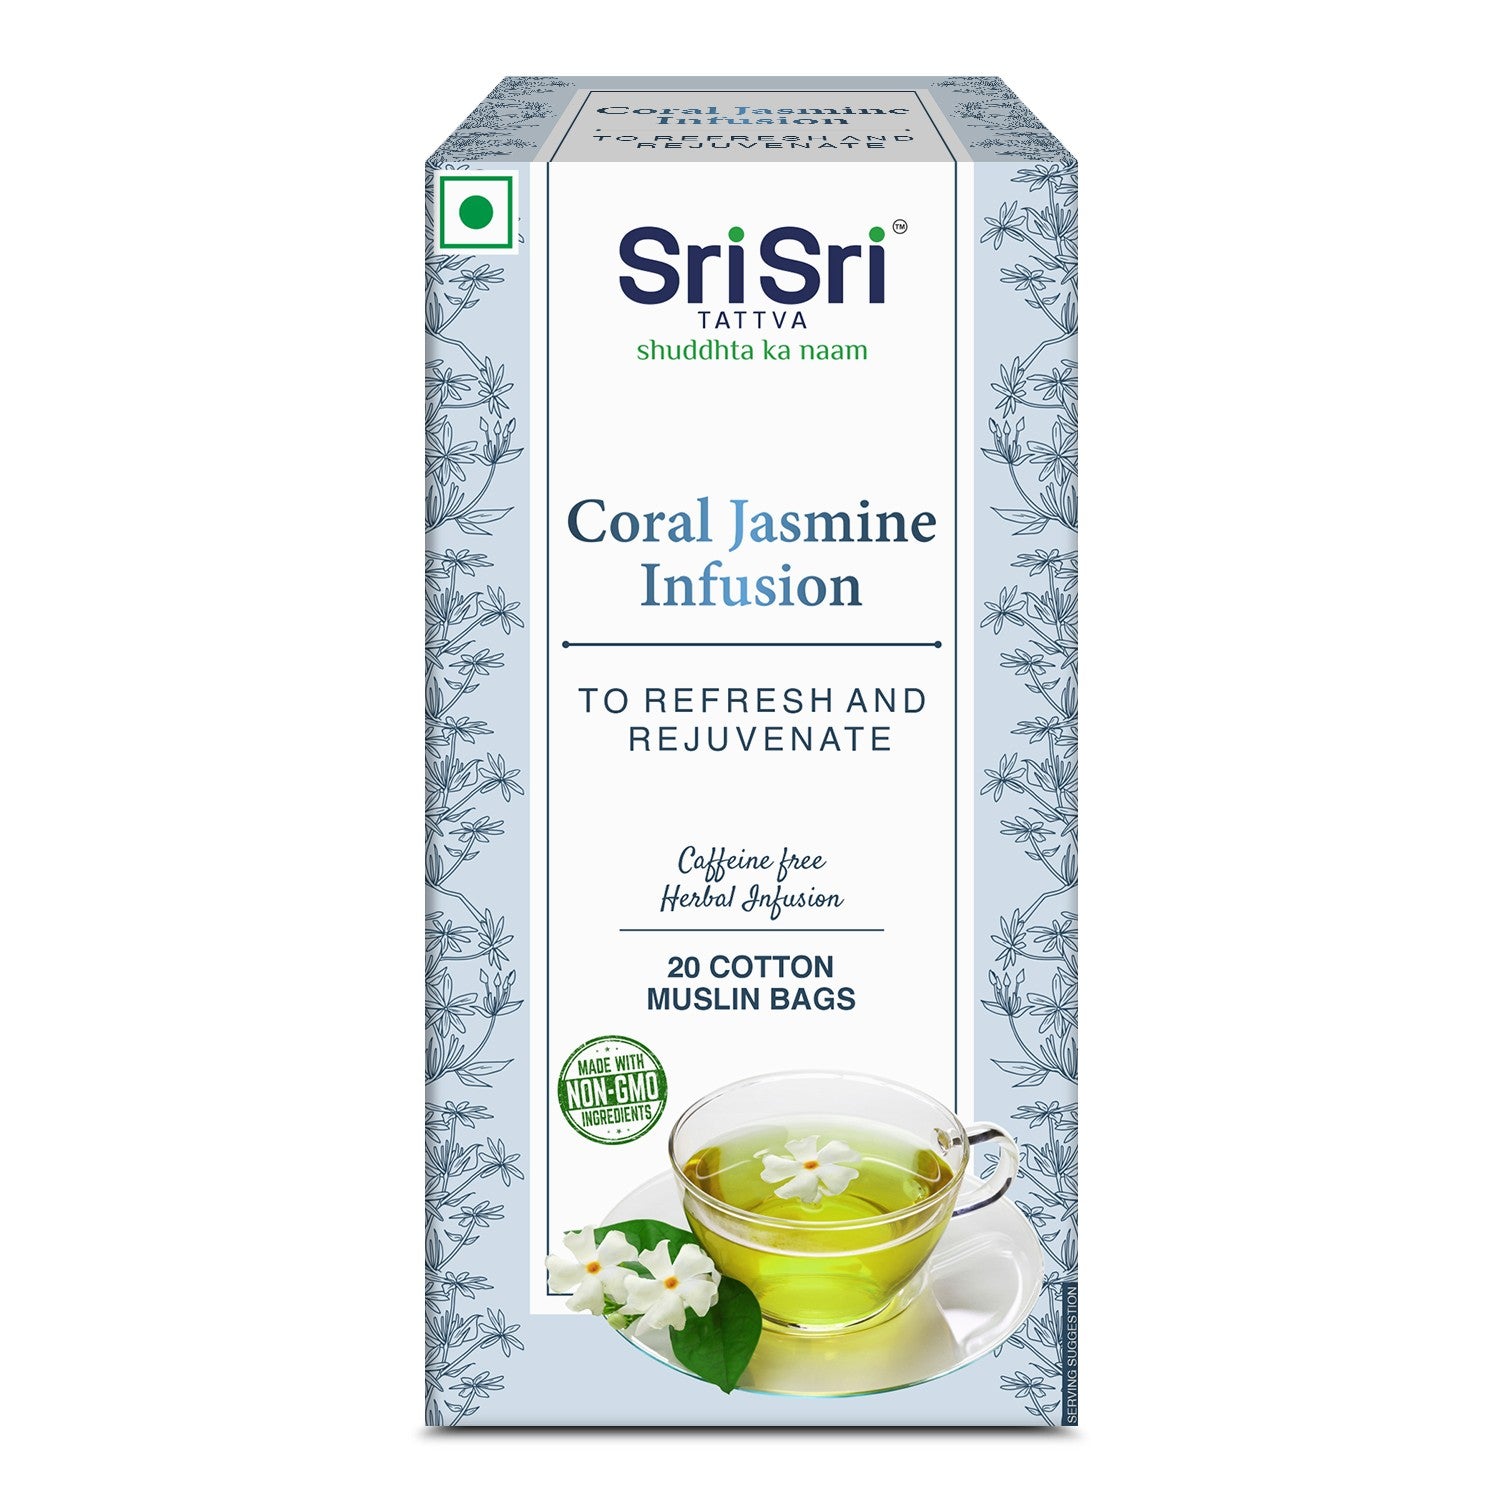 Coral JASMINE Infusion - TO REFRESH AND REJUVENATE - With the fragrance of freshness - 20 Dip Bags - Sri Sri Tattva